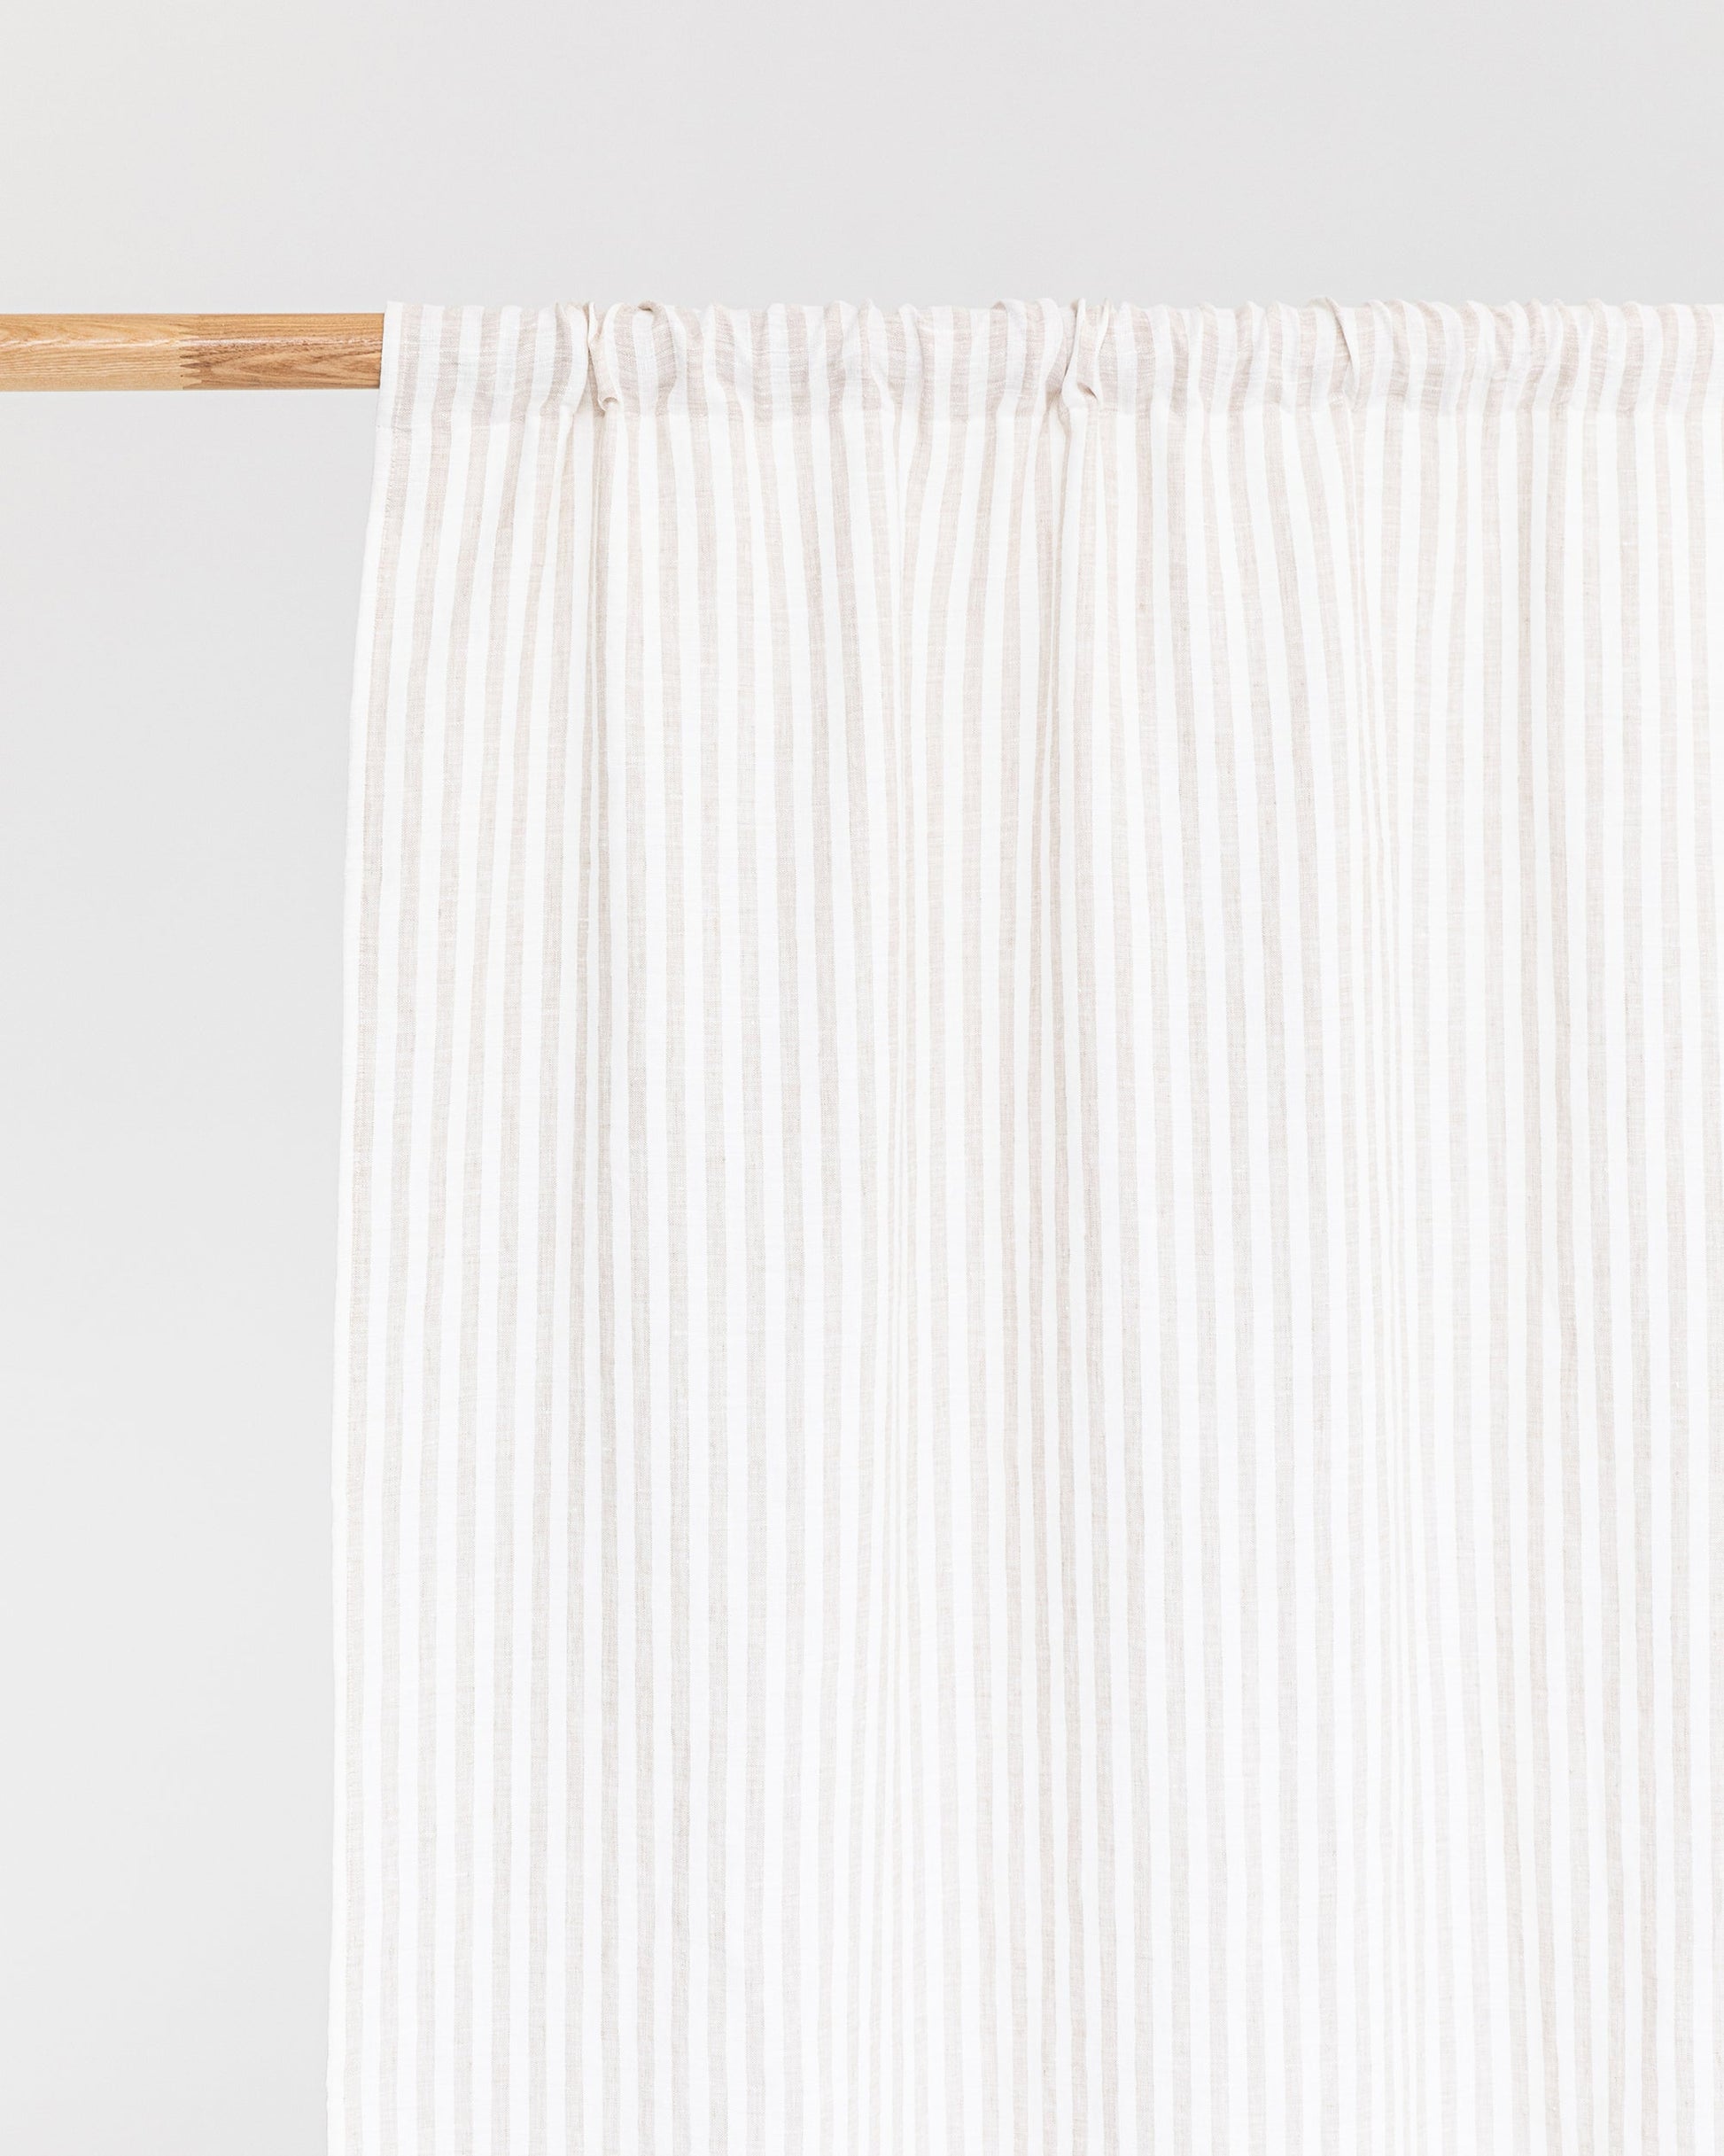 Rod pocket linen curtain panel (1 pcs) in Striped in natural - MagicLinen